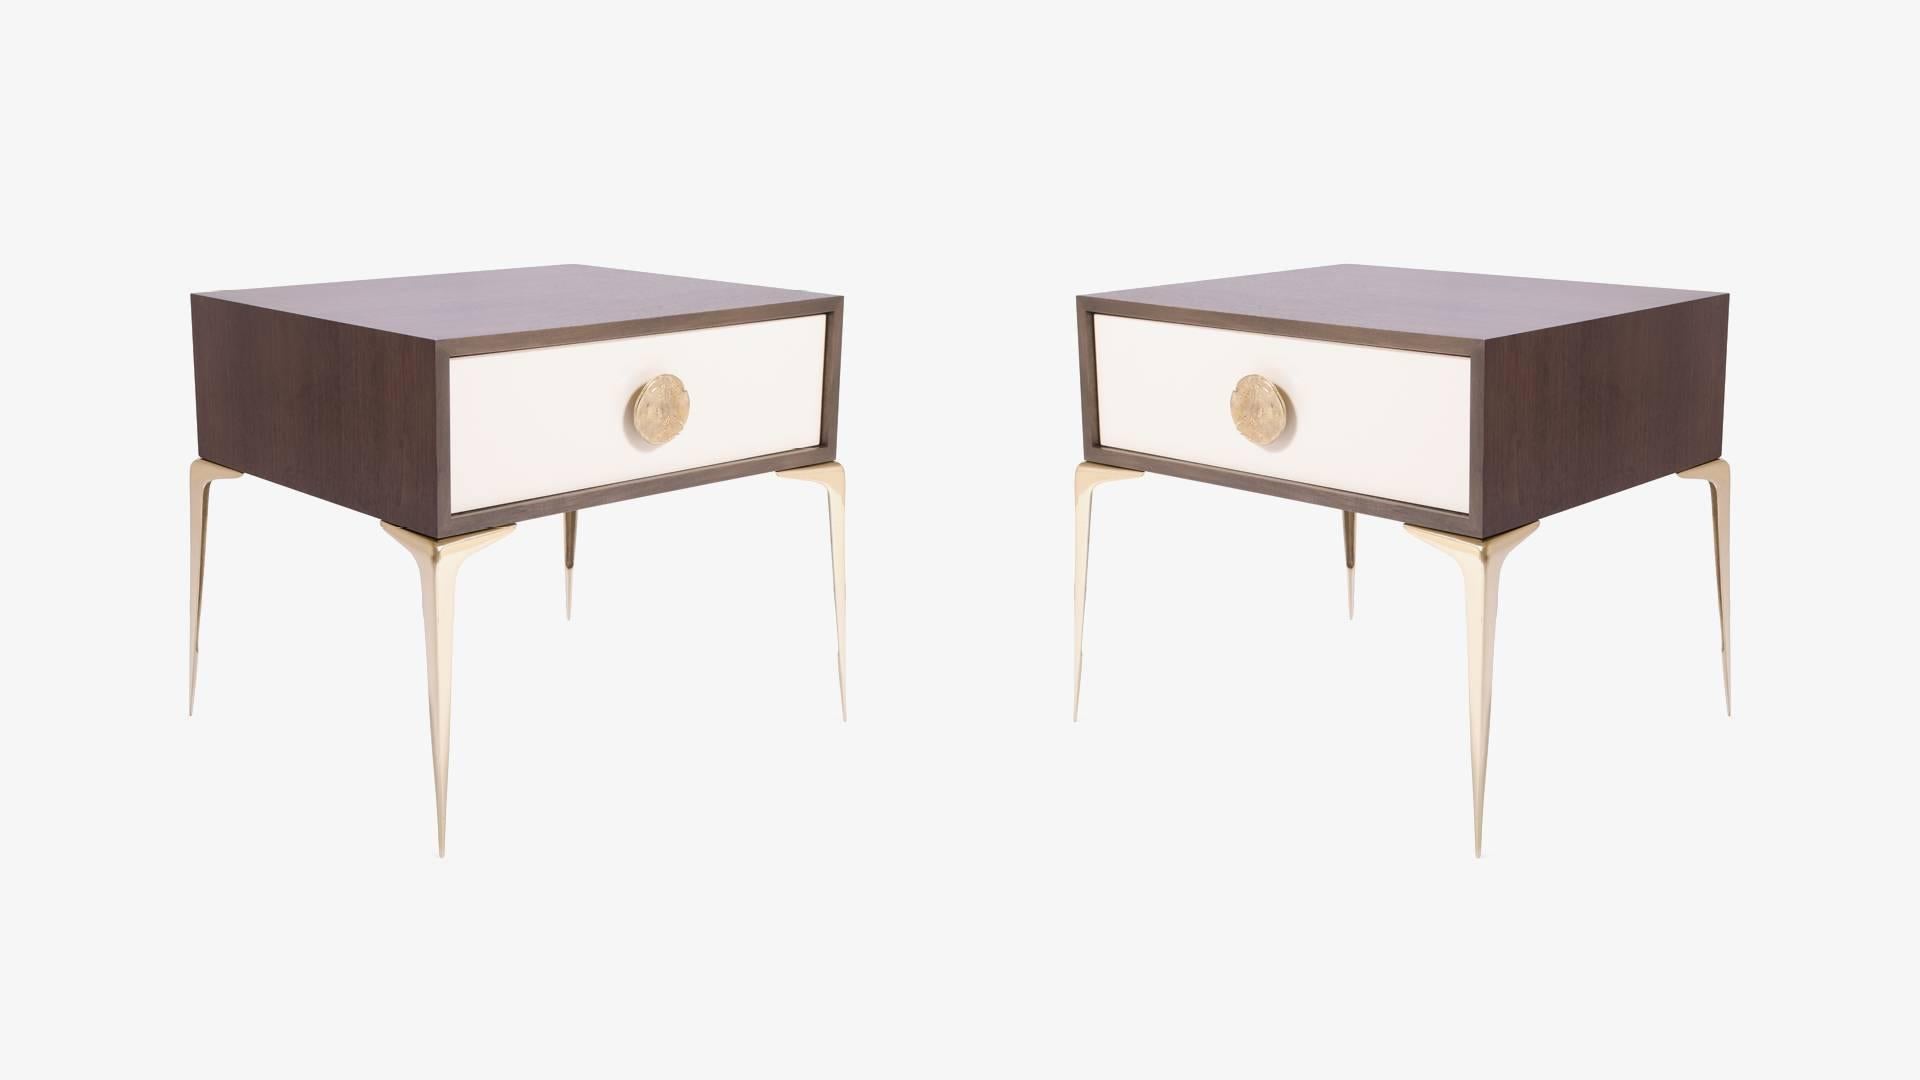 The Colette Nightstand, skillfully executed carpentry with polished brass hardware. Colette was designed with the delicate proportions of the Mid-Century, celebrating an era of design that remains ever so popular today.  

The Colette Collection is